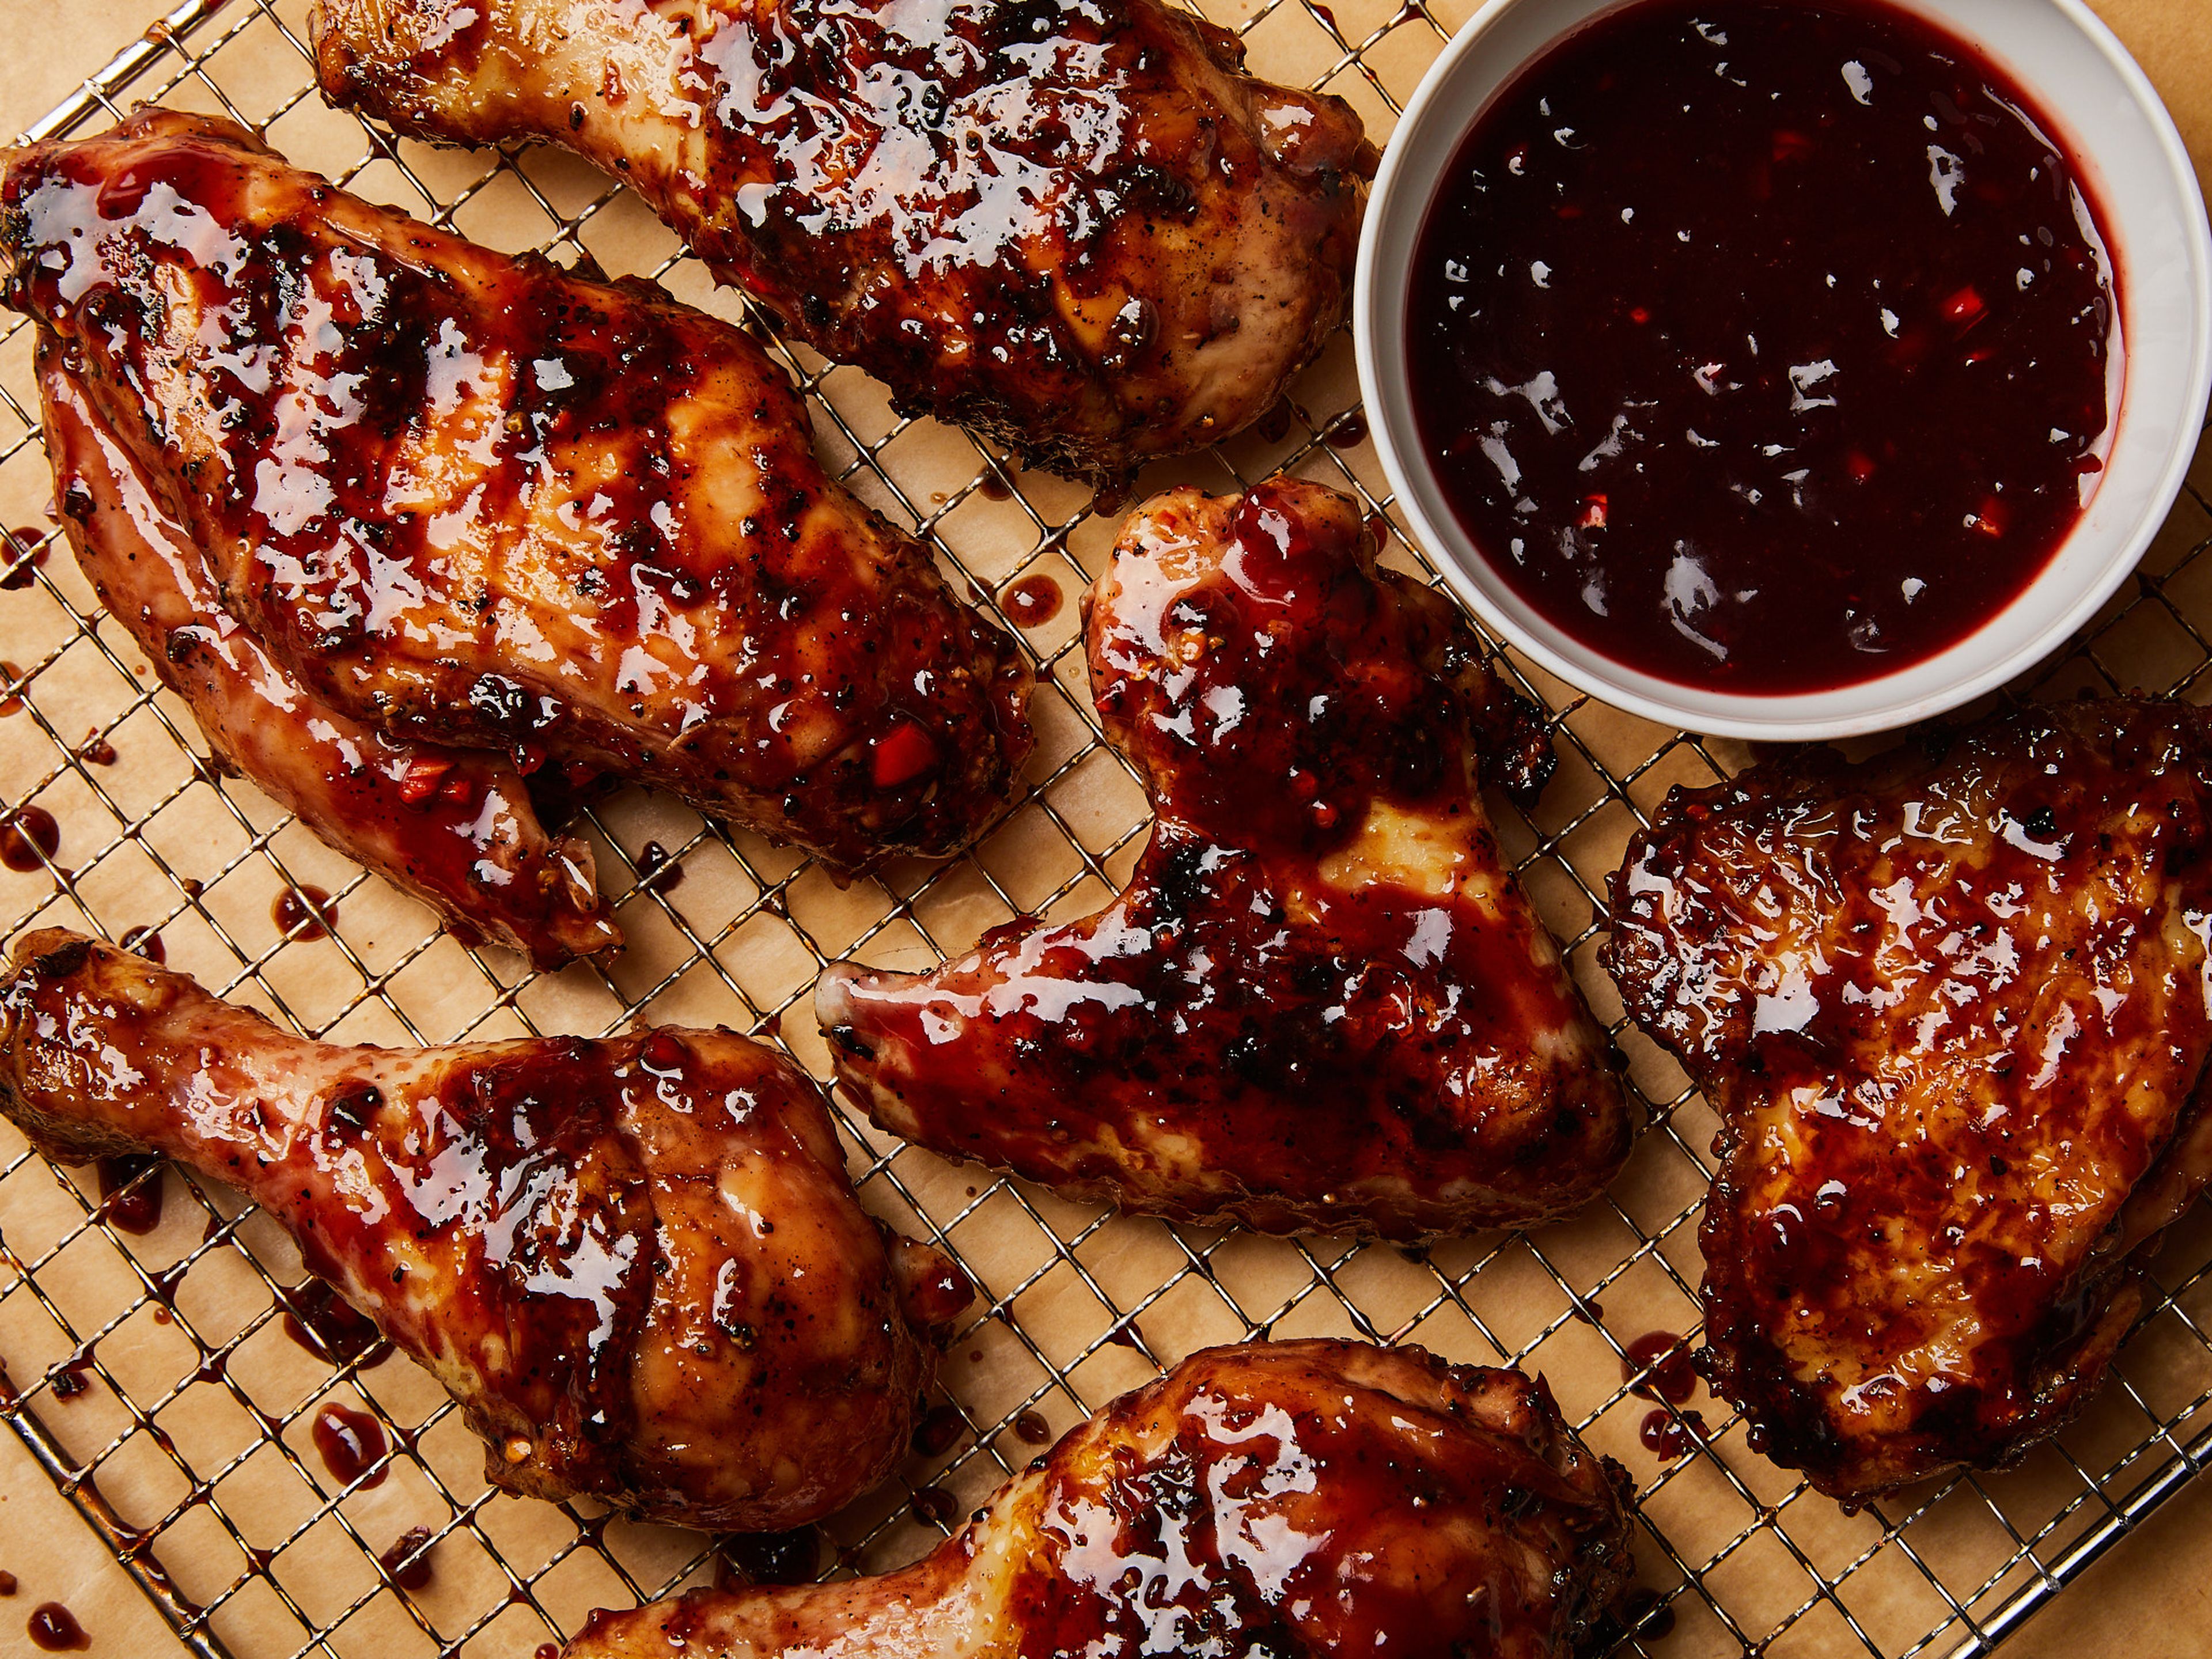 Juicy grilled and glazed chicken